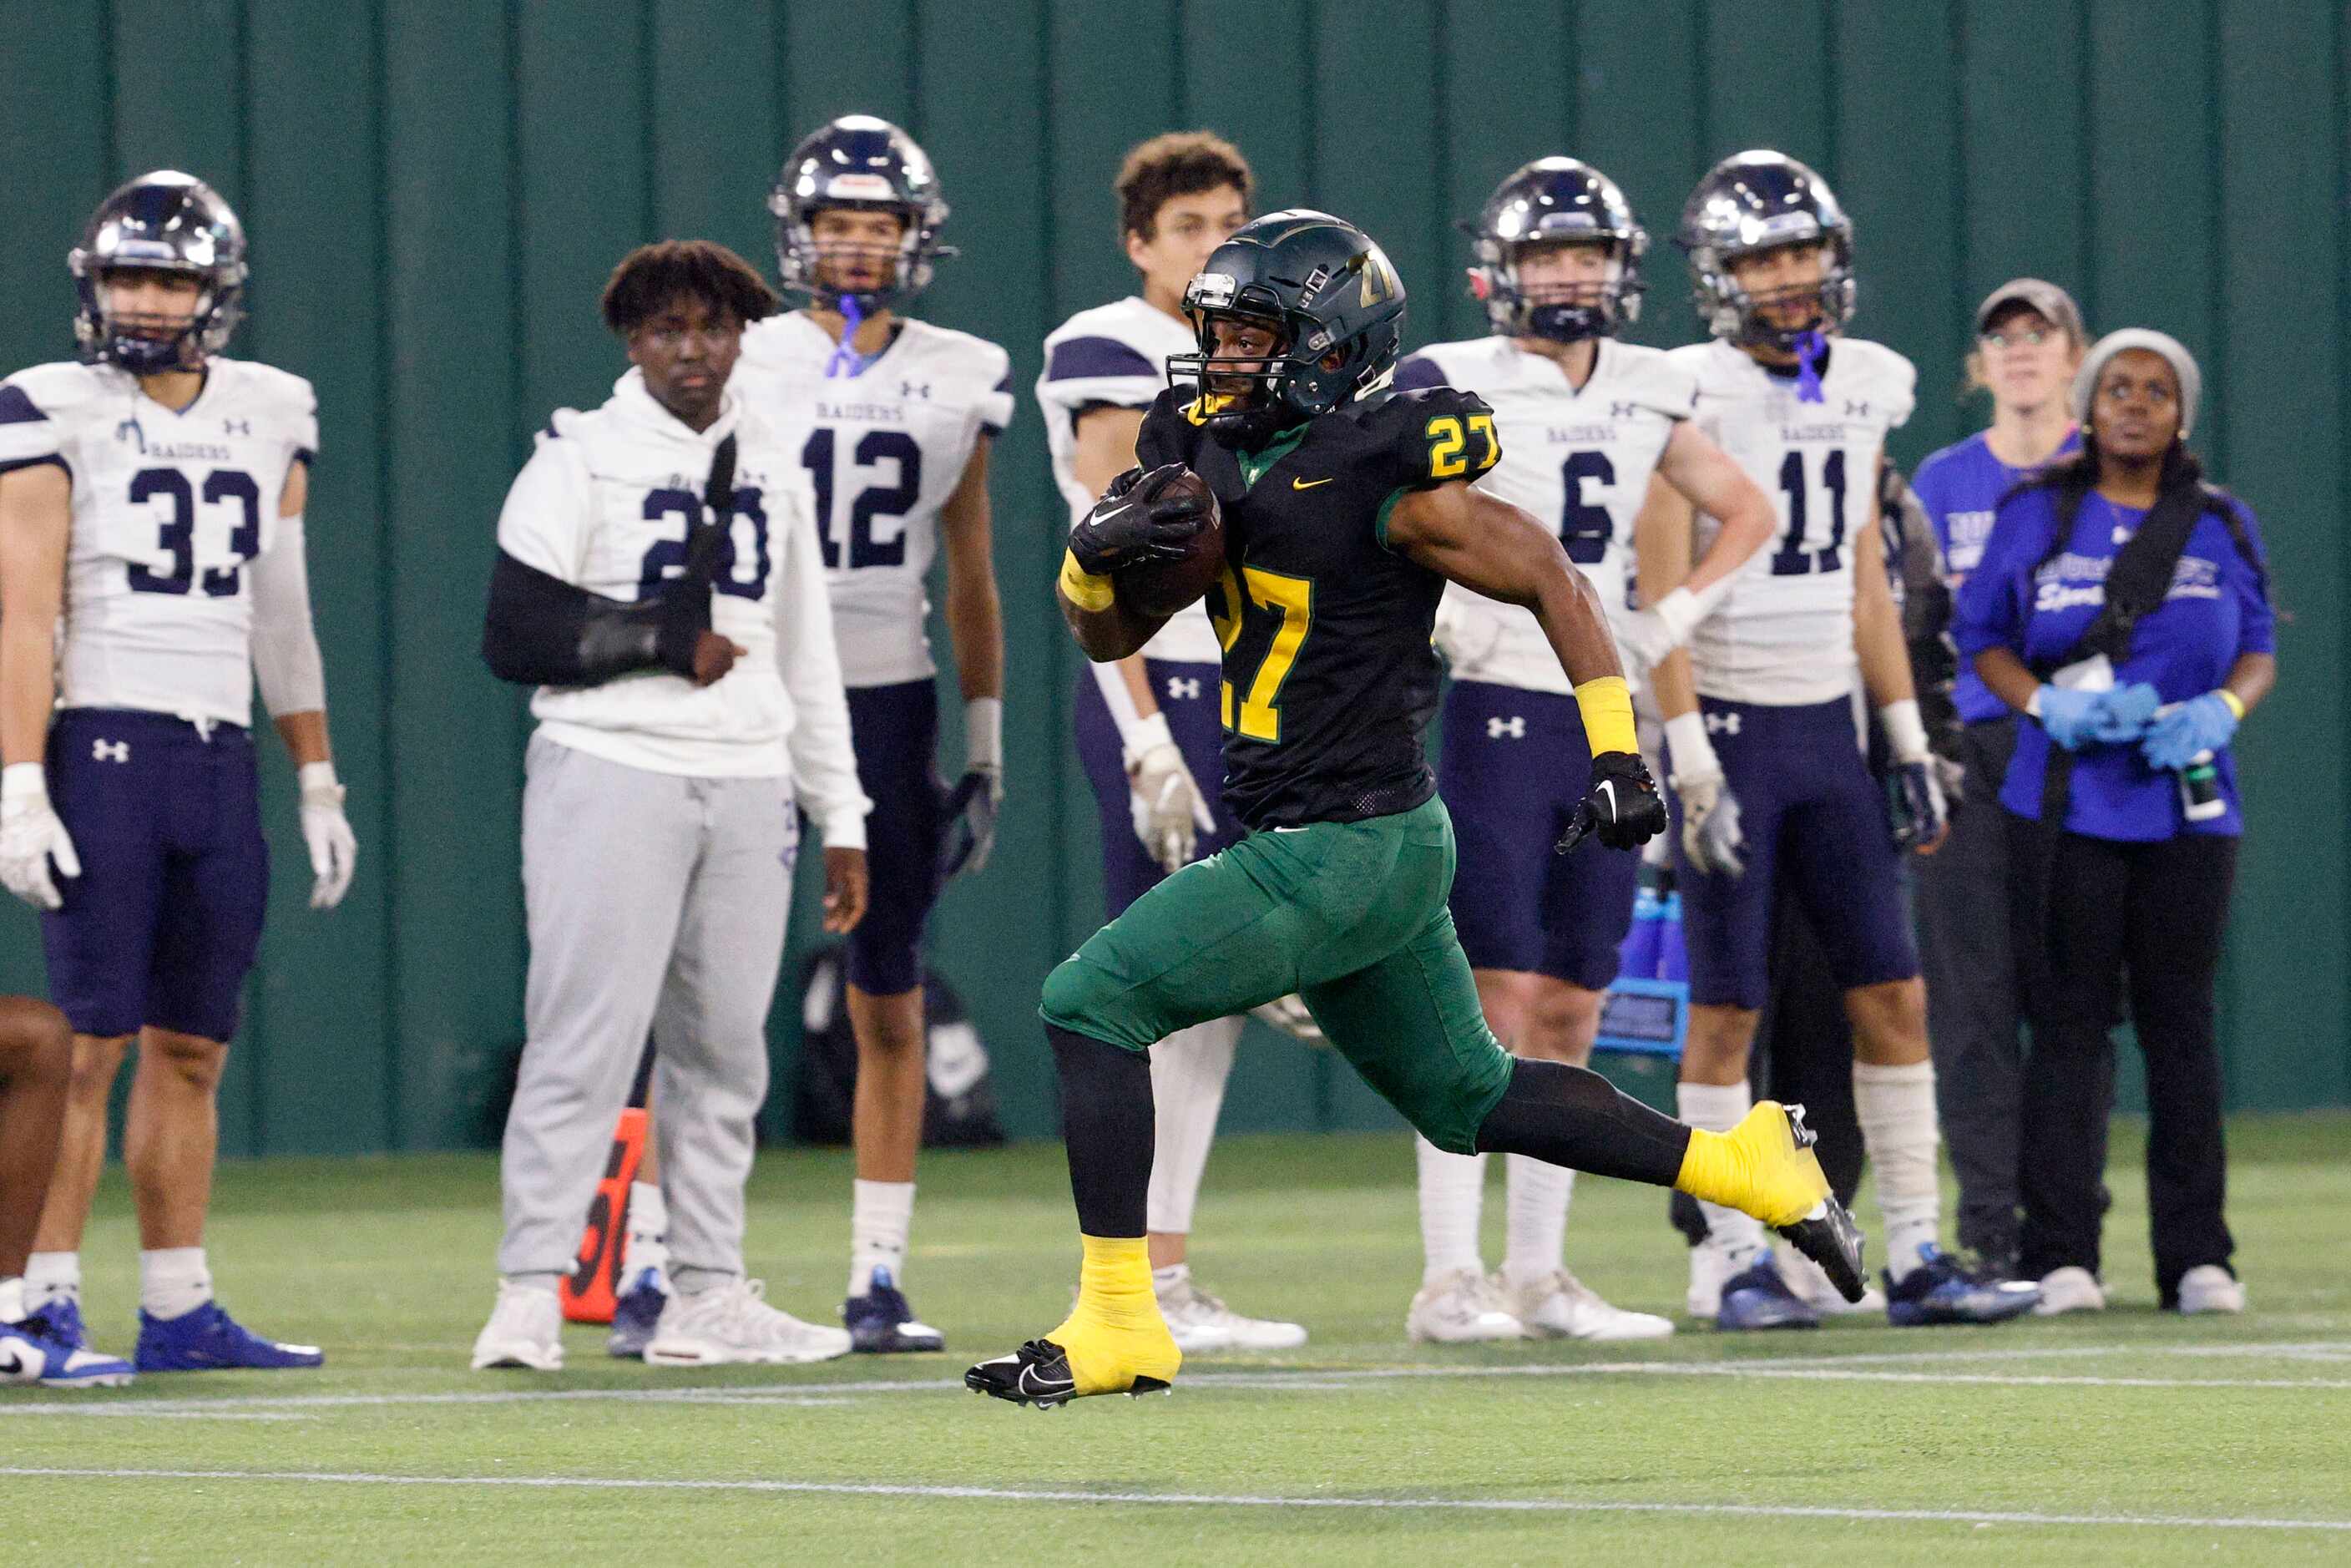 DeSoto's Marvin Duffey (27) runs into the end zone for a touchdown as Wylie East players...